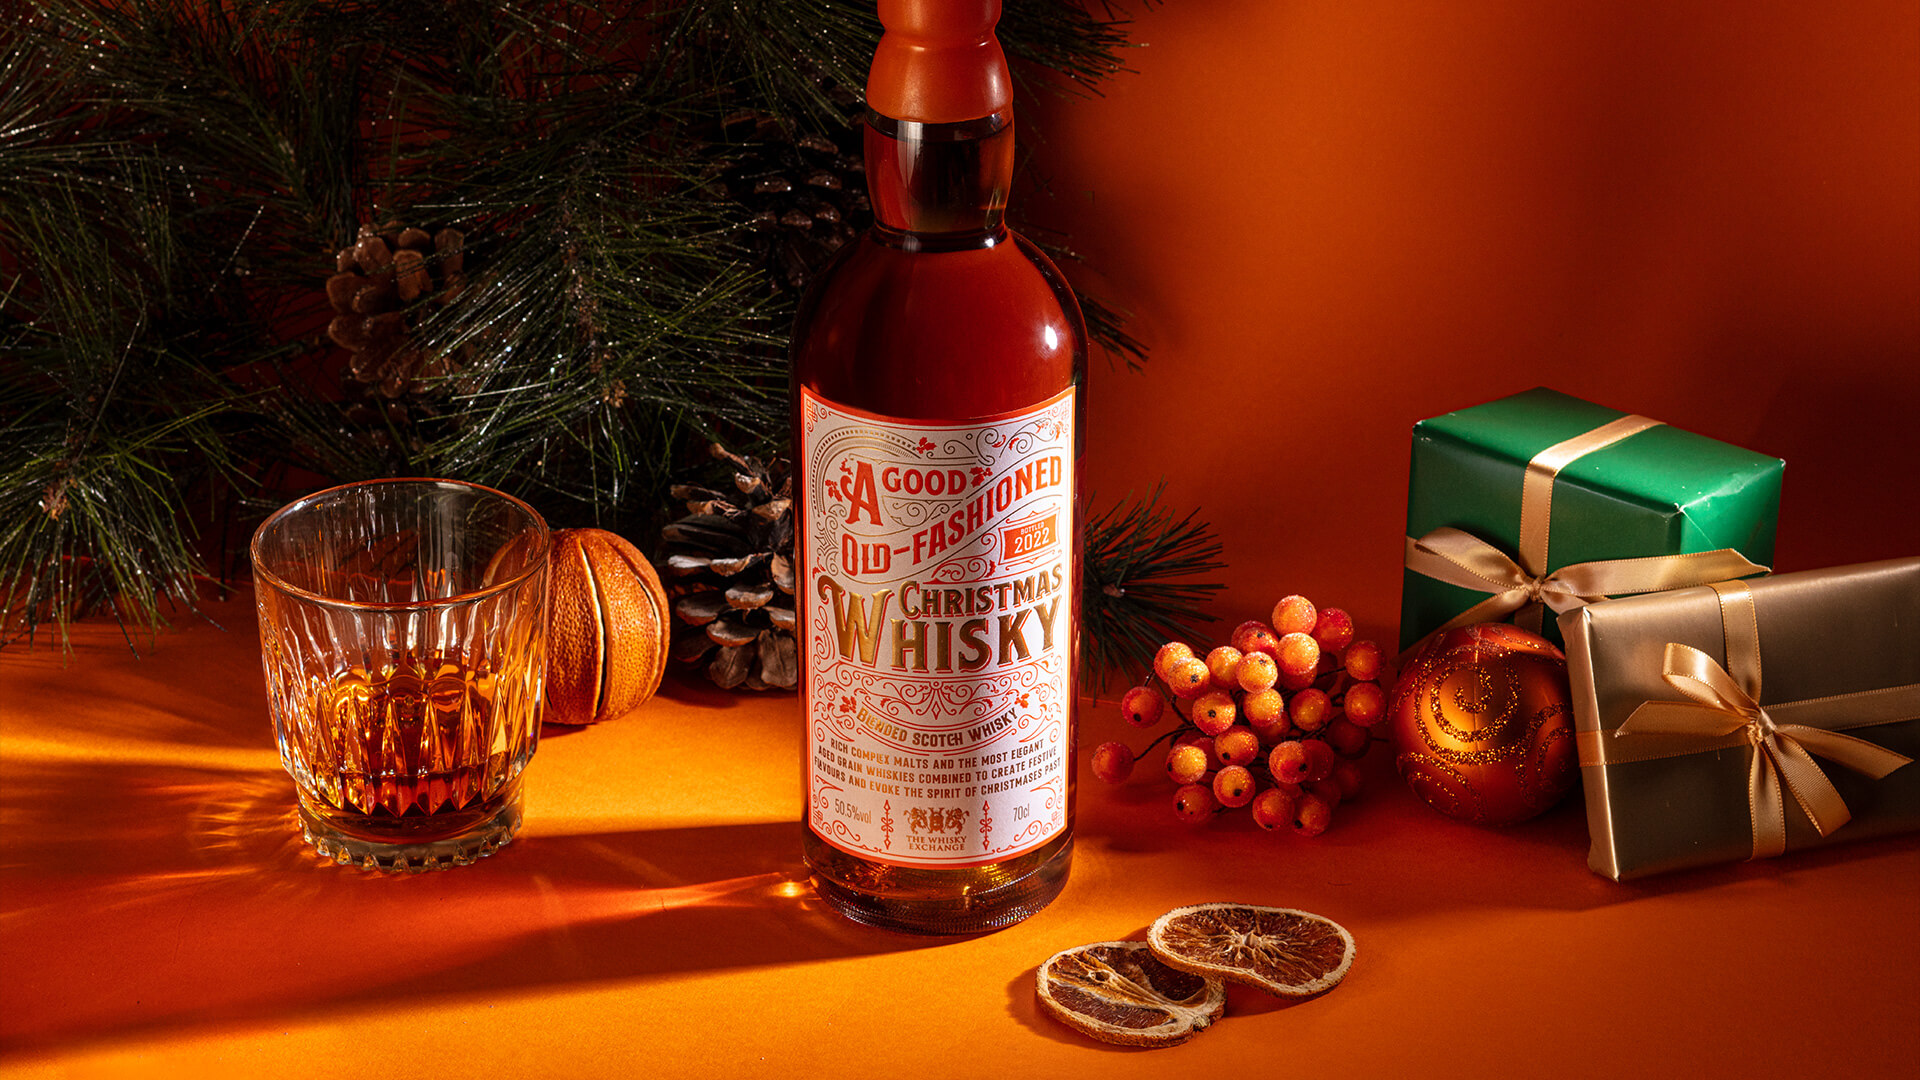 A Good Old-Fashioned Christmas Whisky